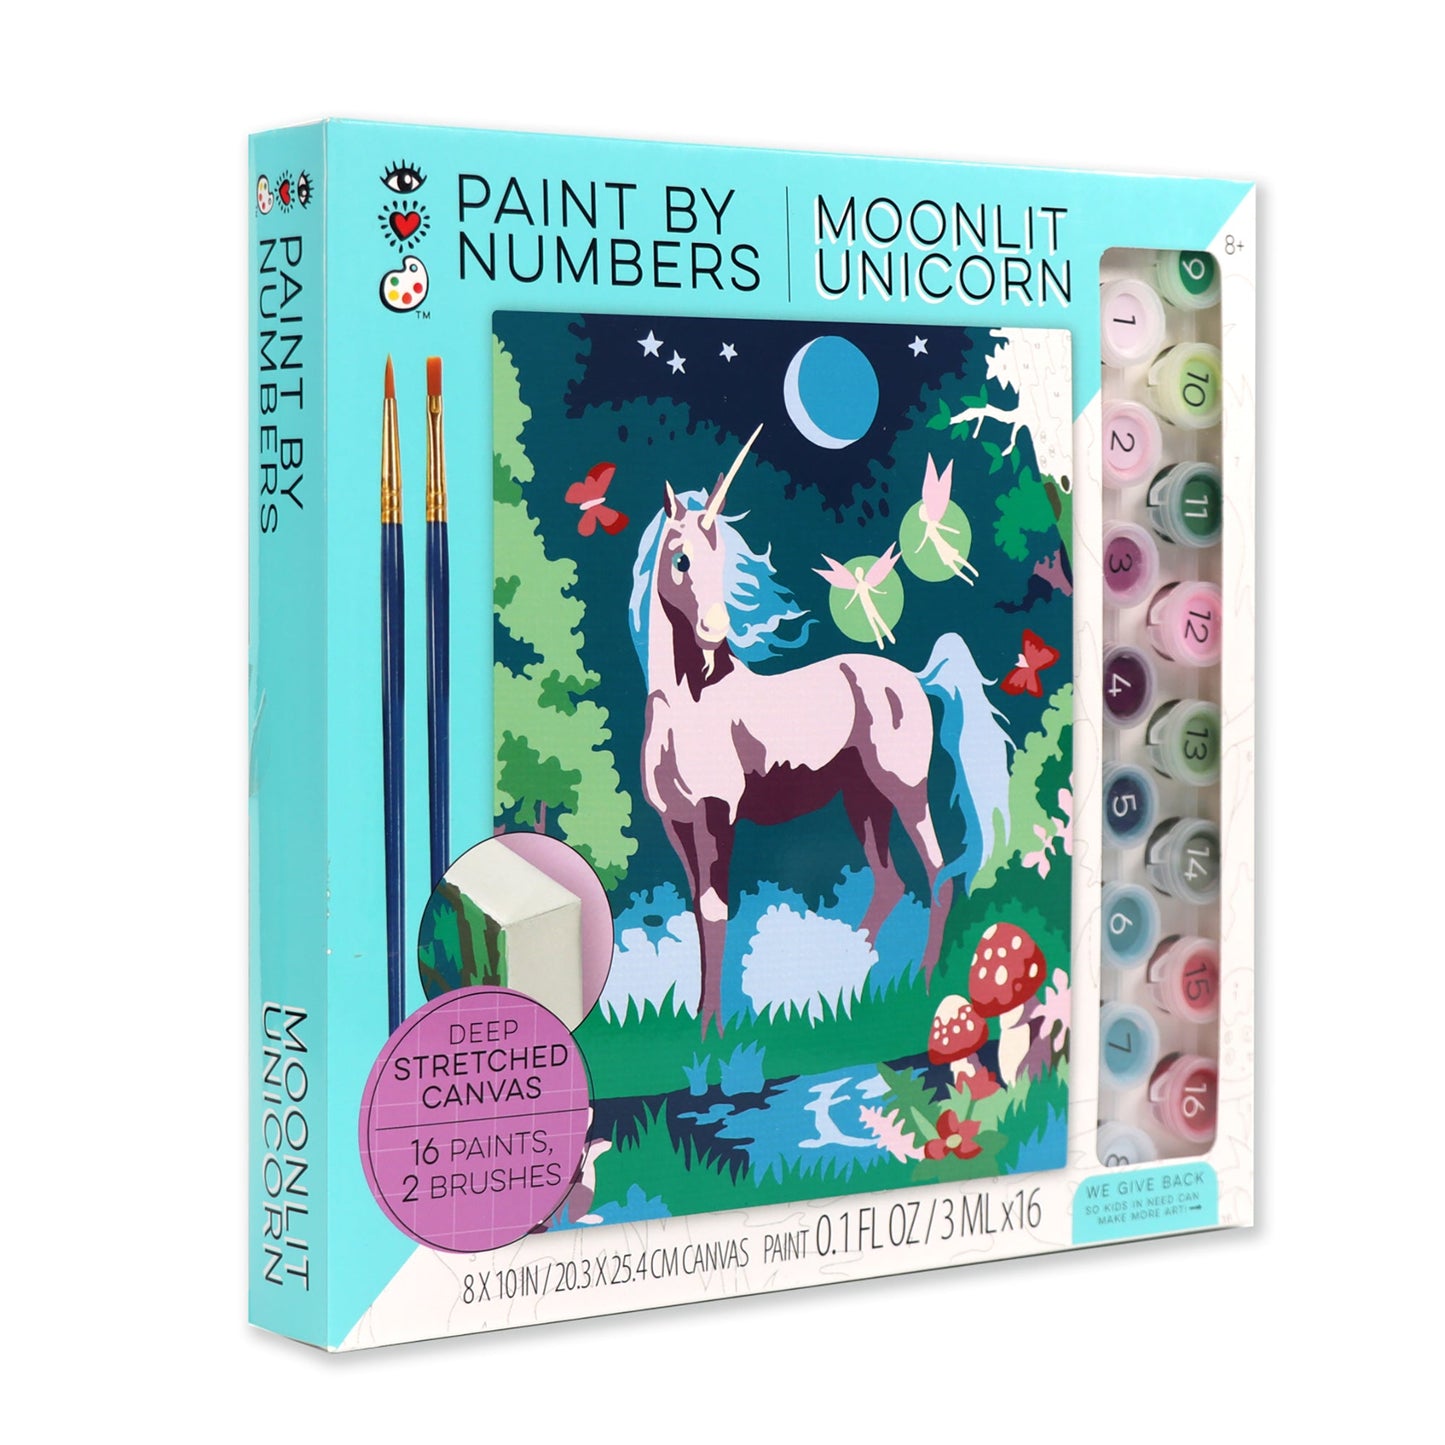 iHeartArt Paint by Numbers Moonlit Unicorn - Supply Closet